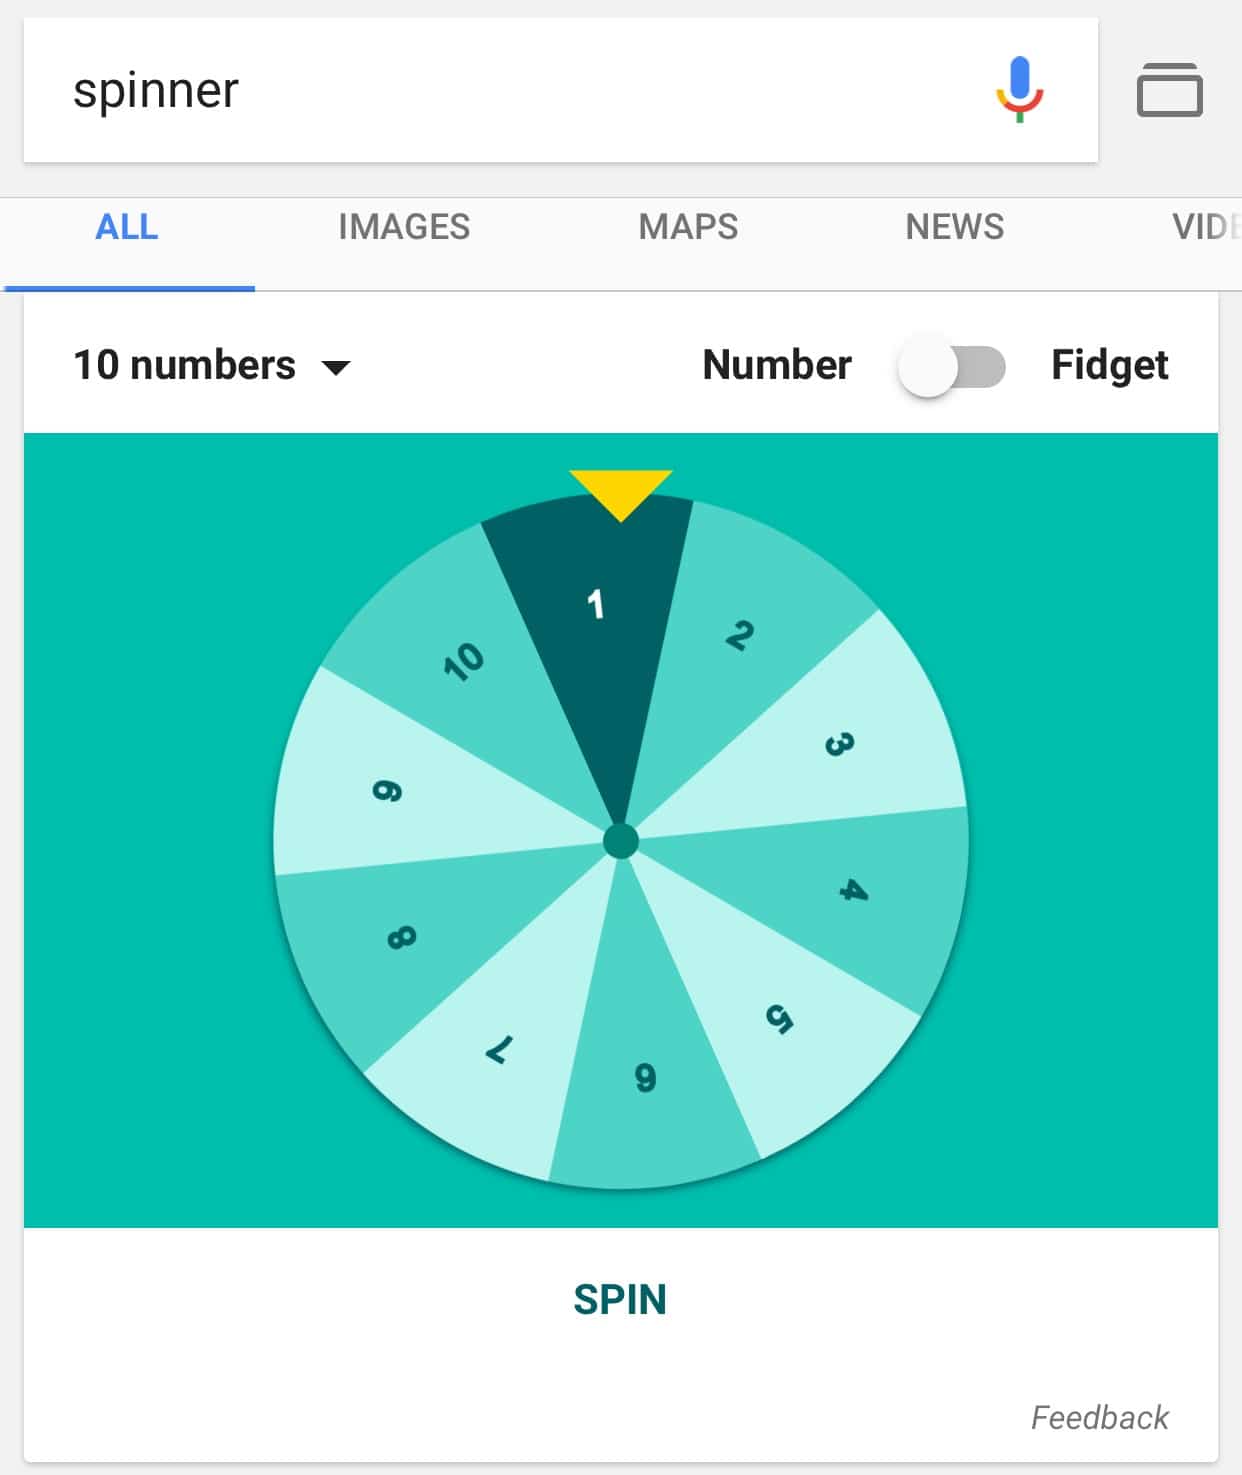 Google Adds A Fidget Spinner To Its Basket Of Easter Eggs